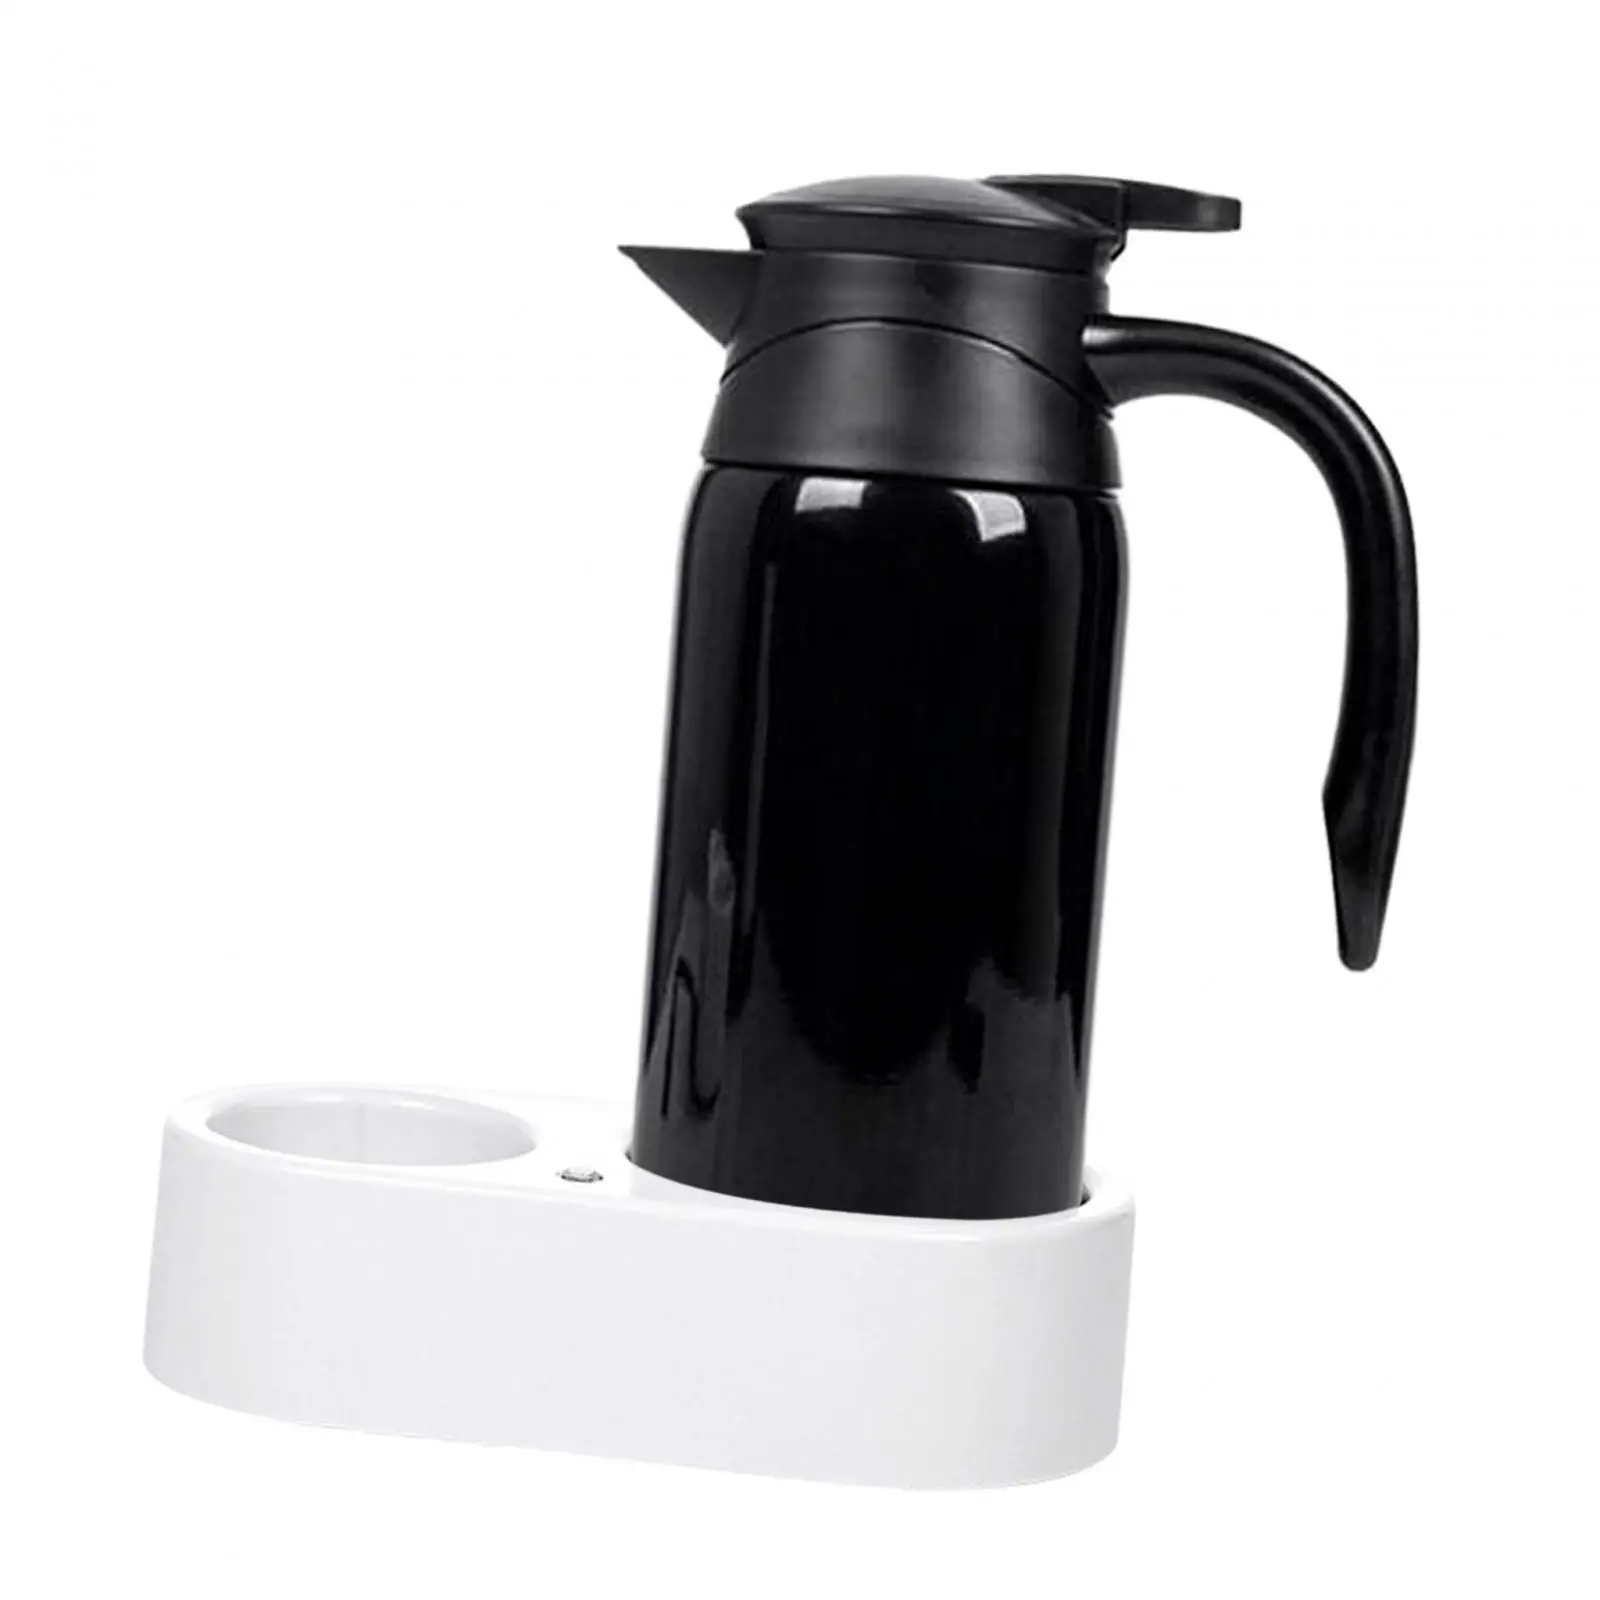 Car Heating Drinking Cup Travel Kettle 800ml 12.4inch Tall Multifunctional